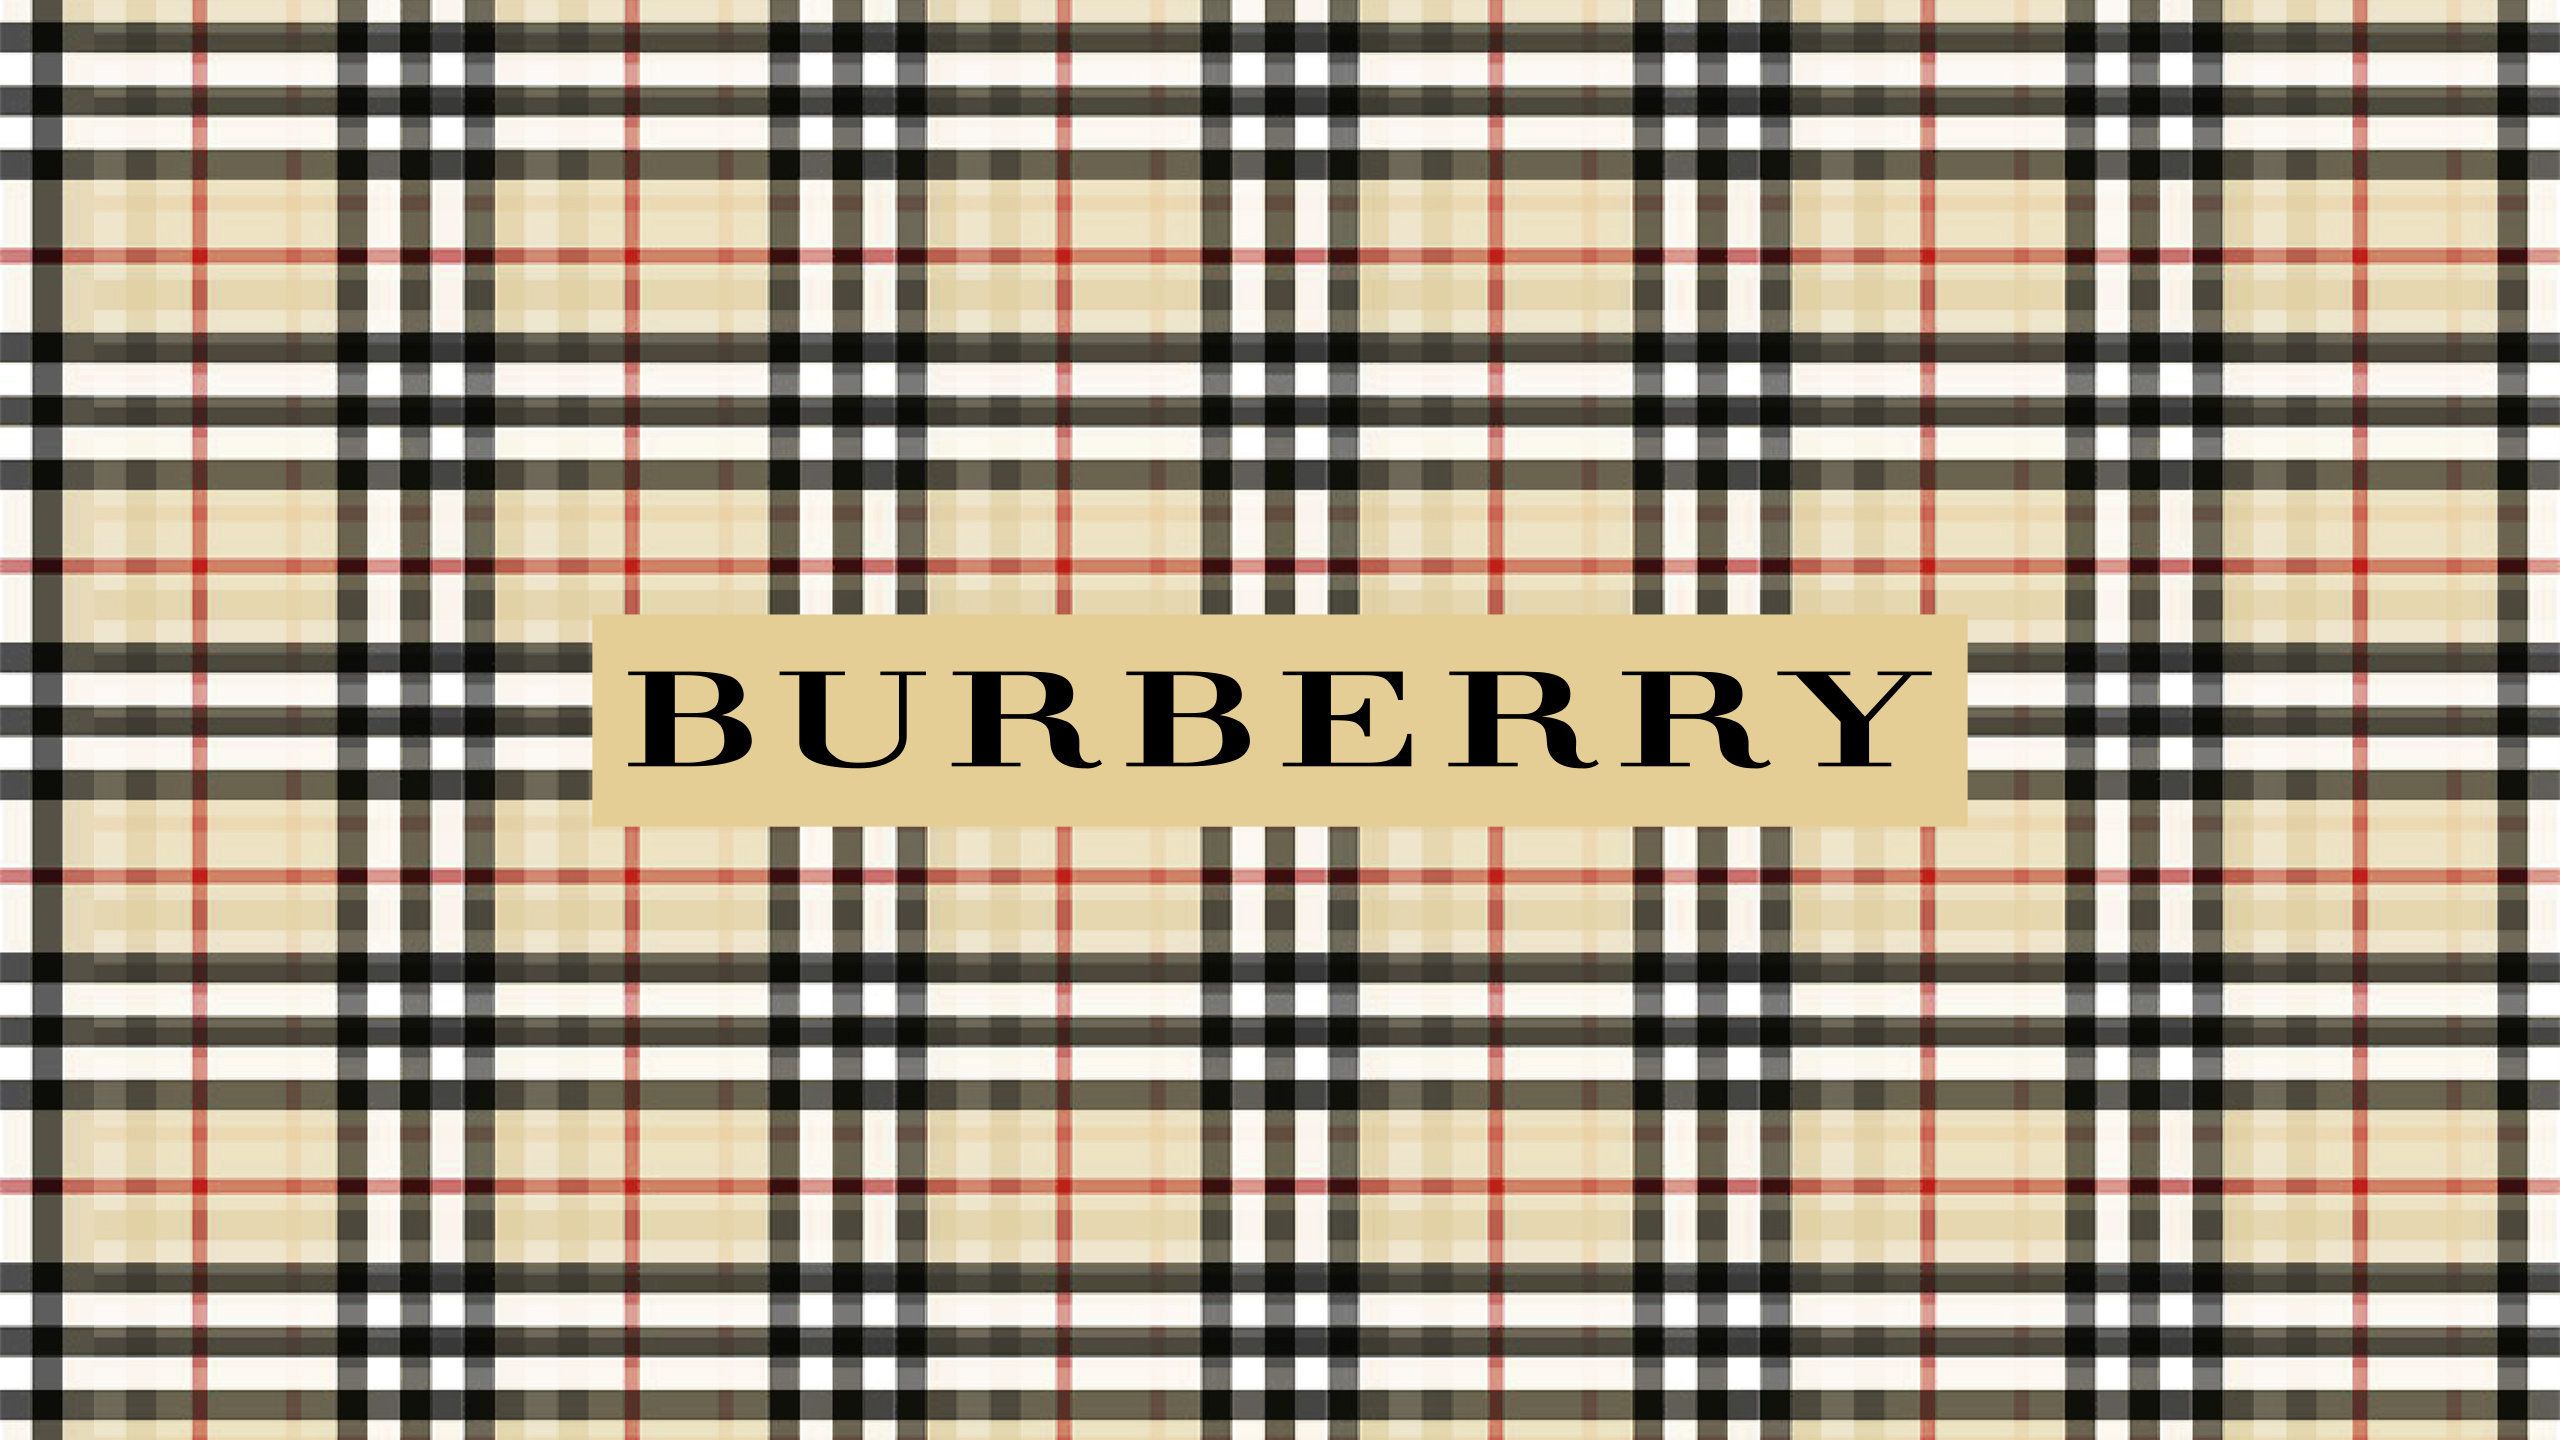 Burberry Wallpaper - Wall.BestKitchenView.CO